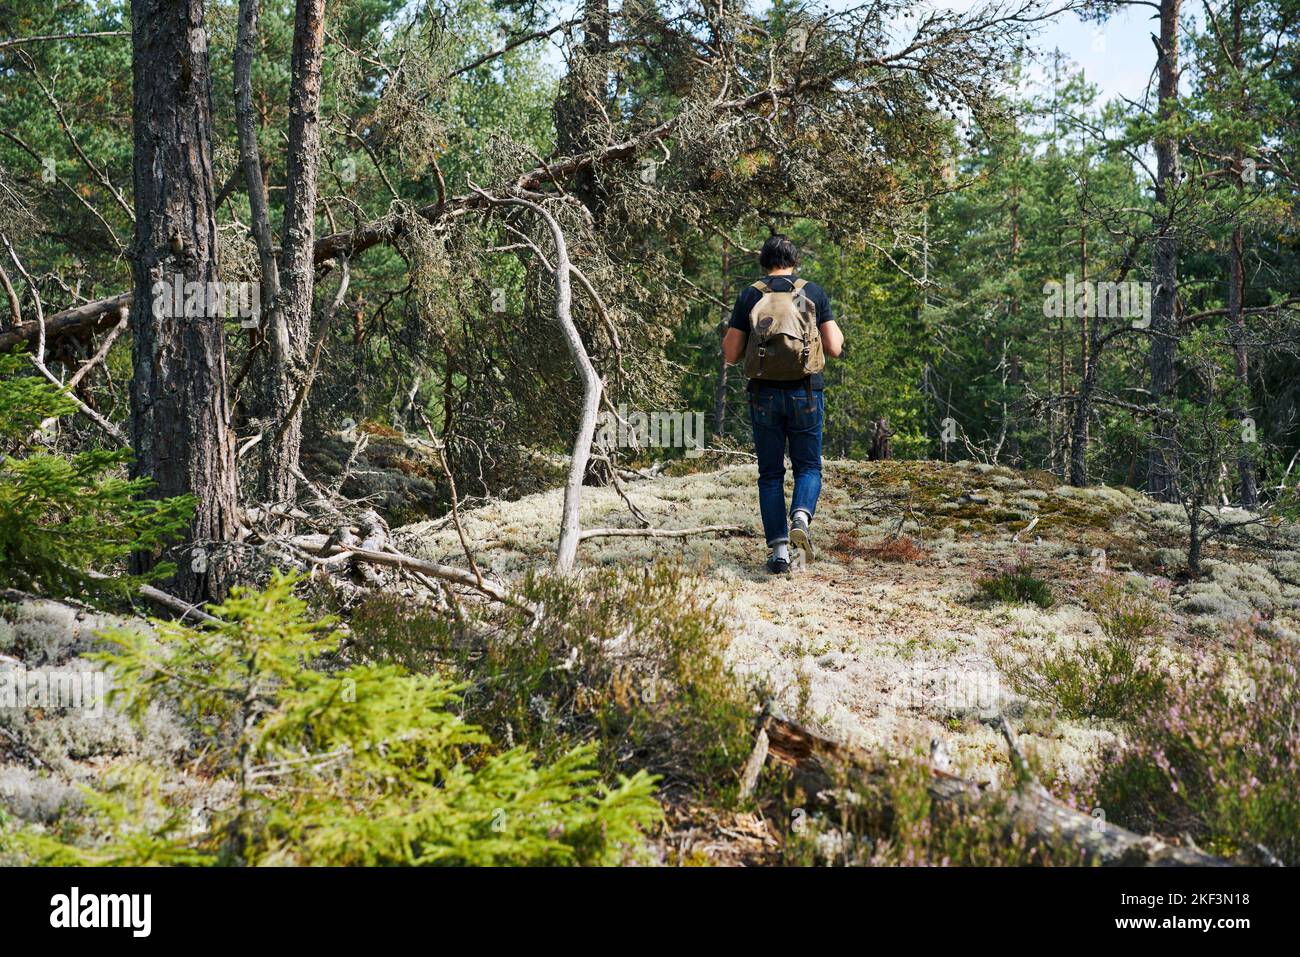 Man with backpack hiking through forest Stock Photo